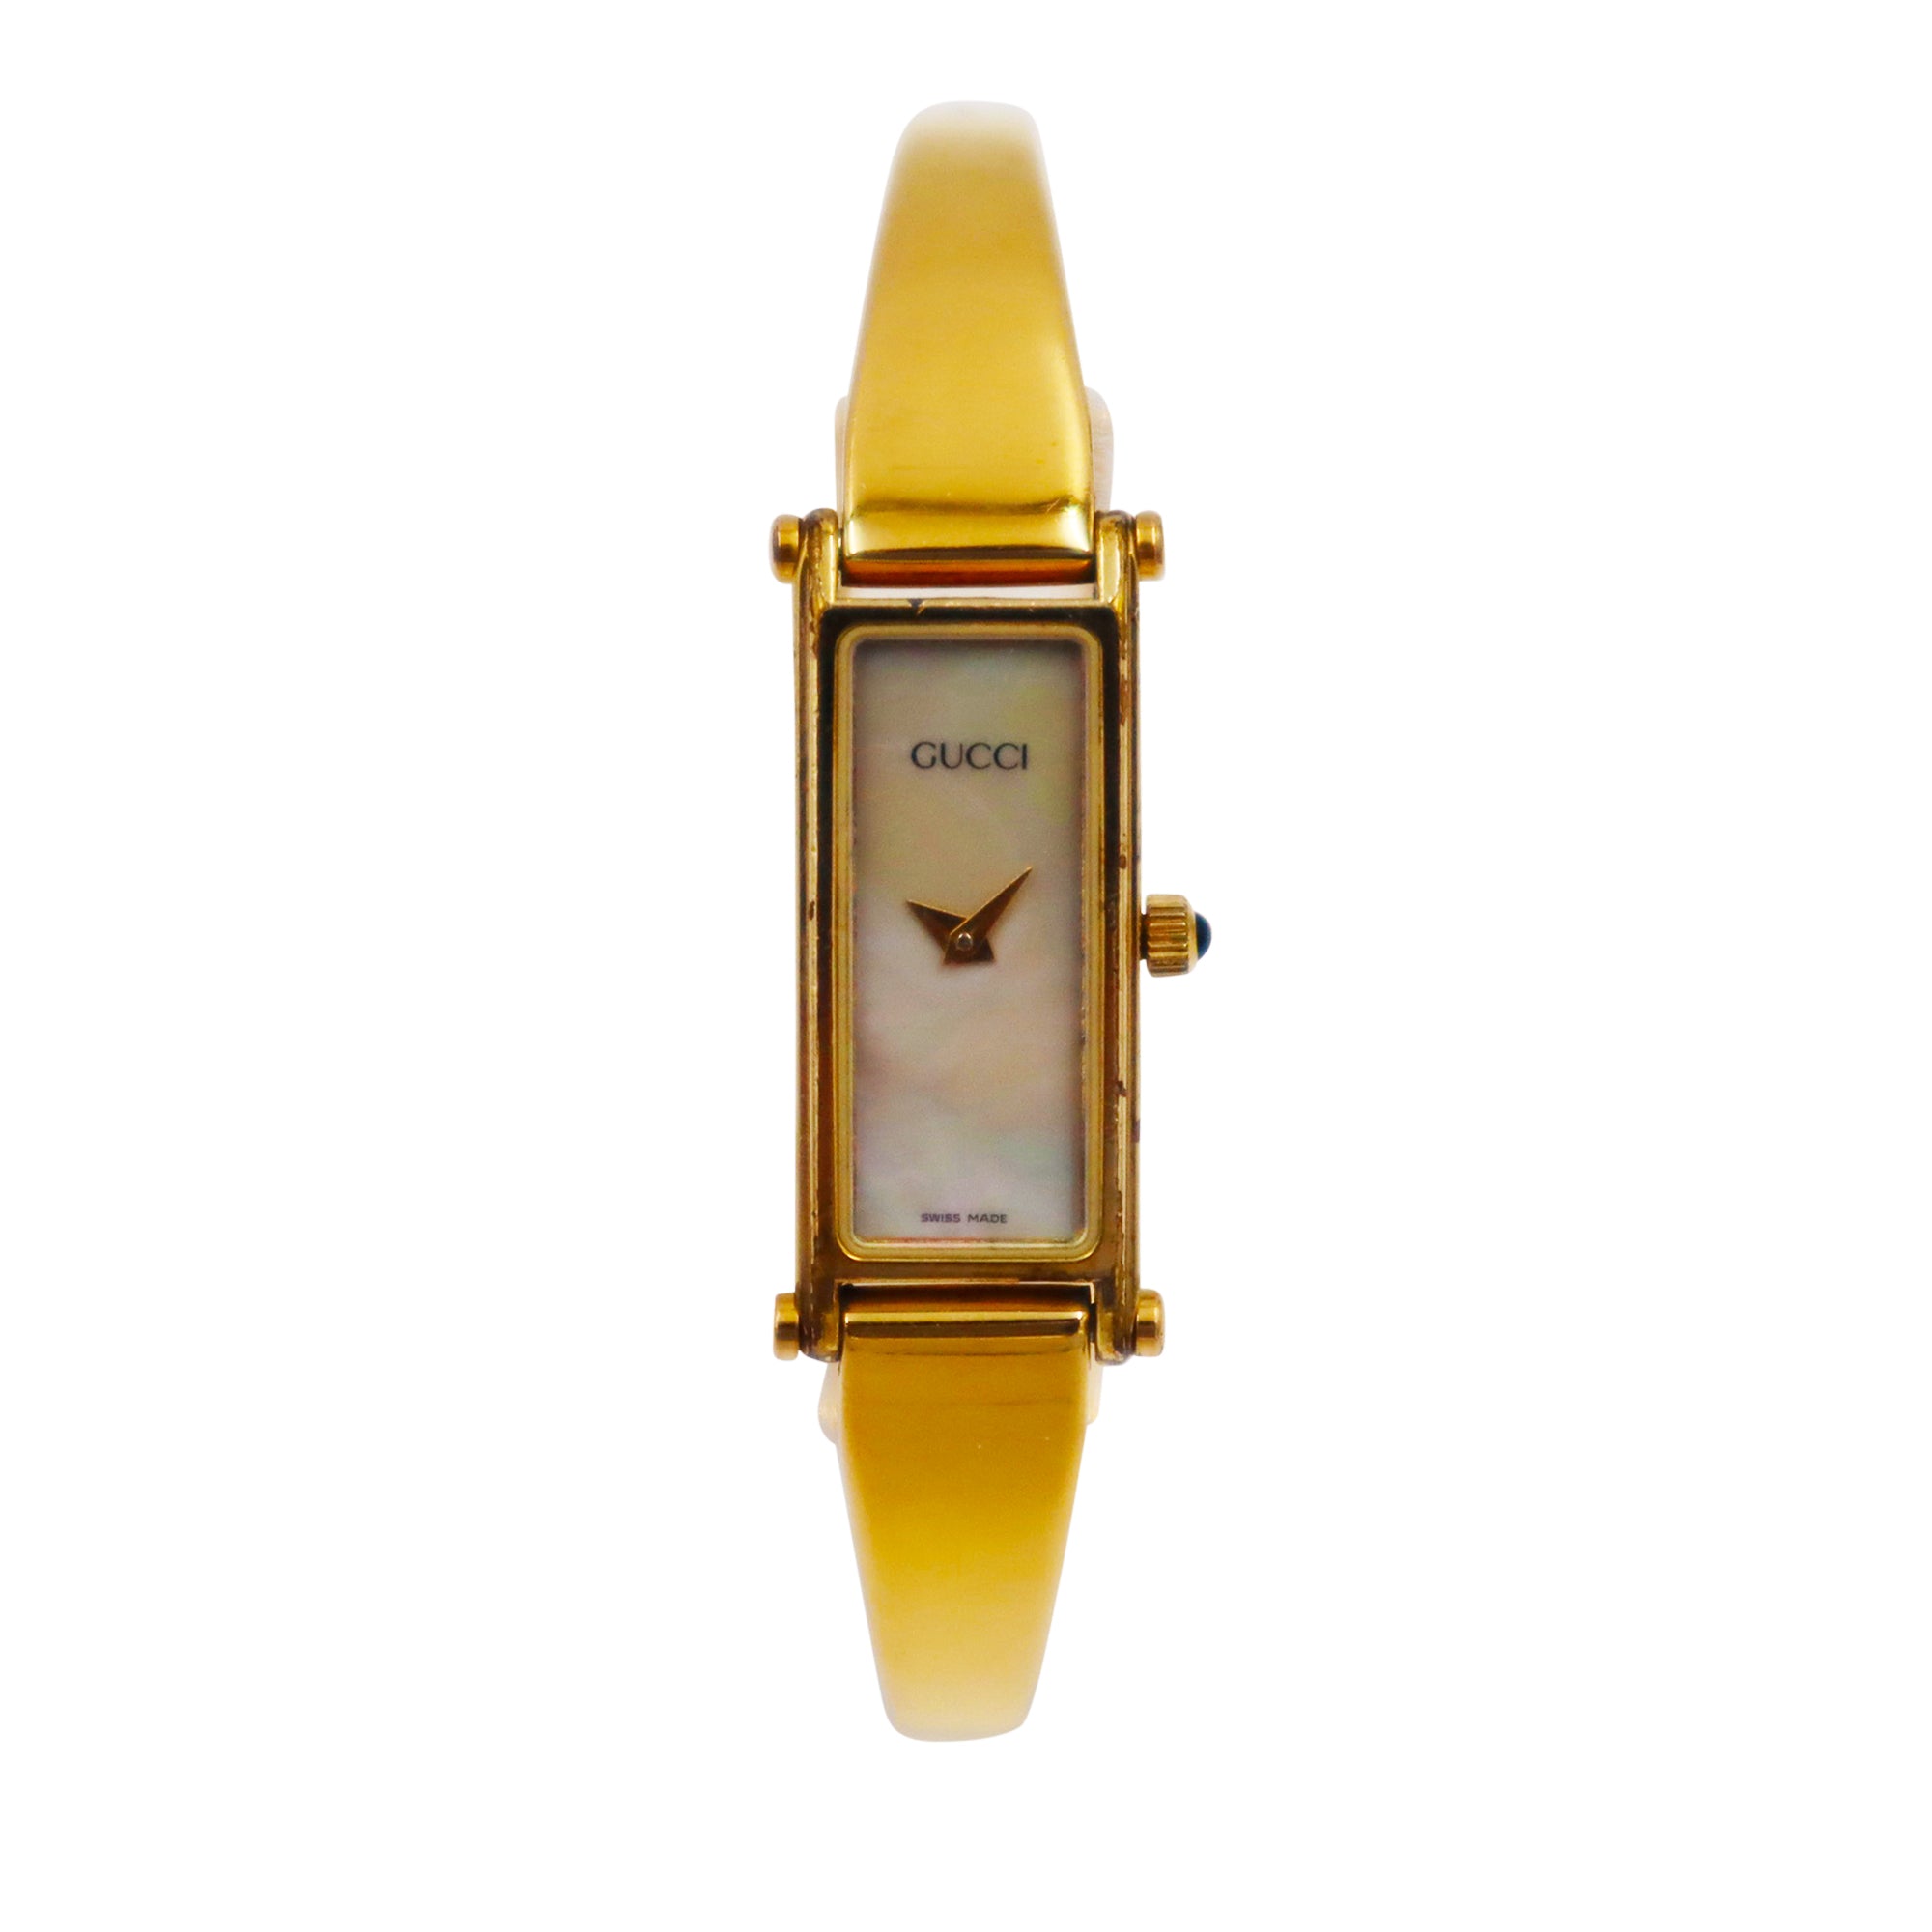 DEAL OF THE DAY Vintage Gucci Ladies 1500L Bangle Watch